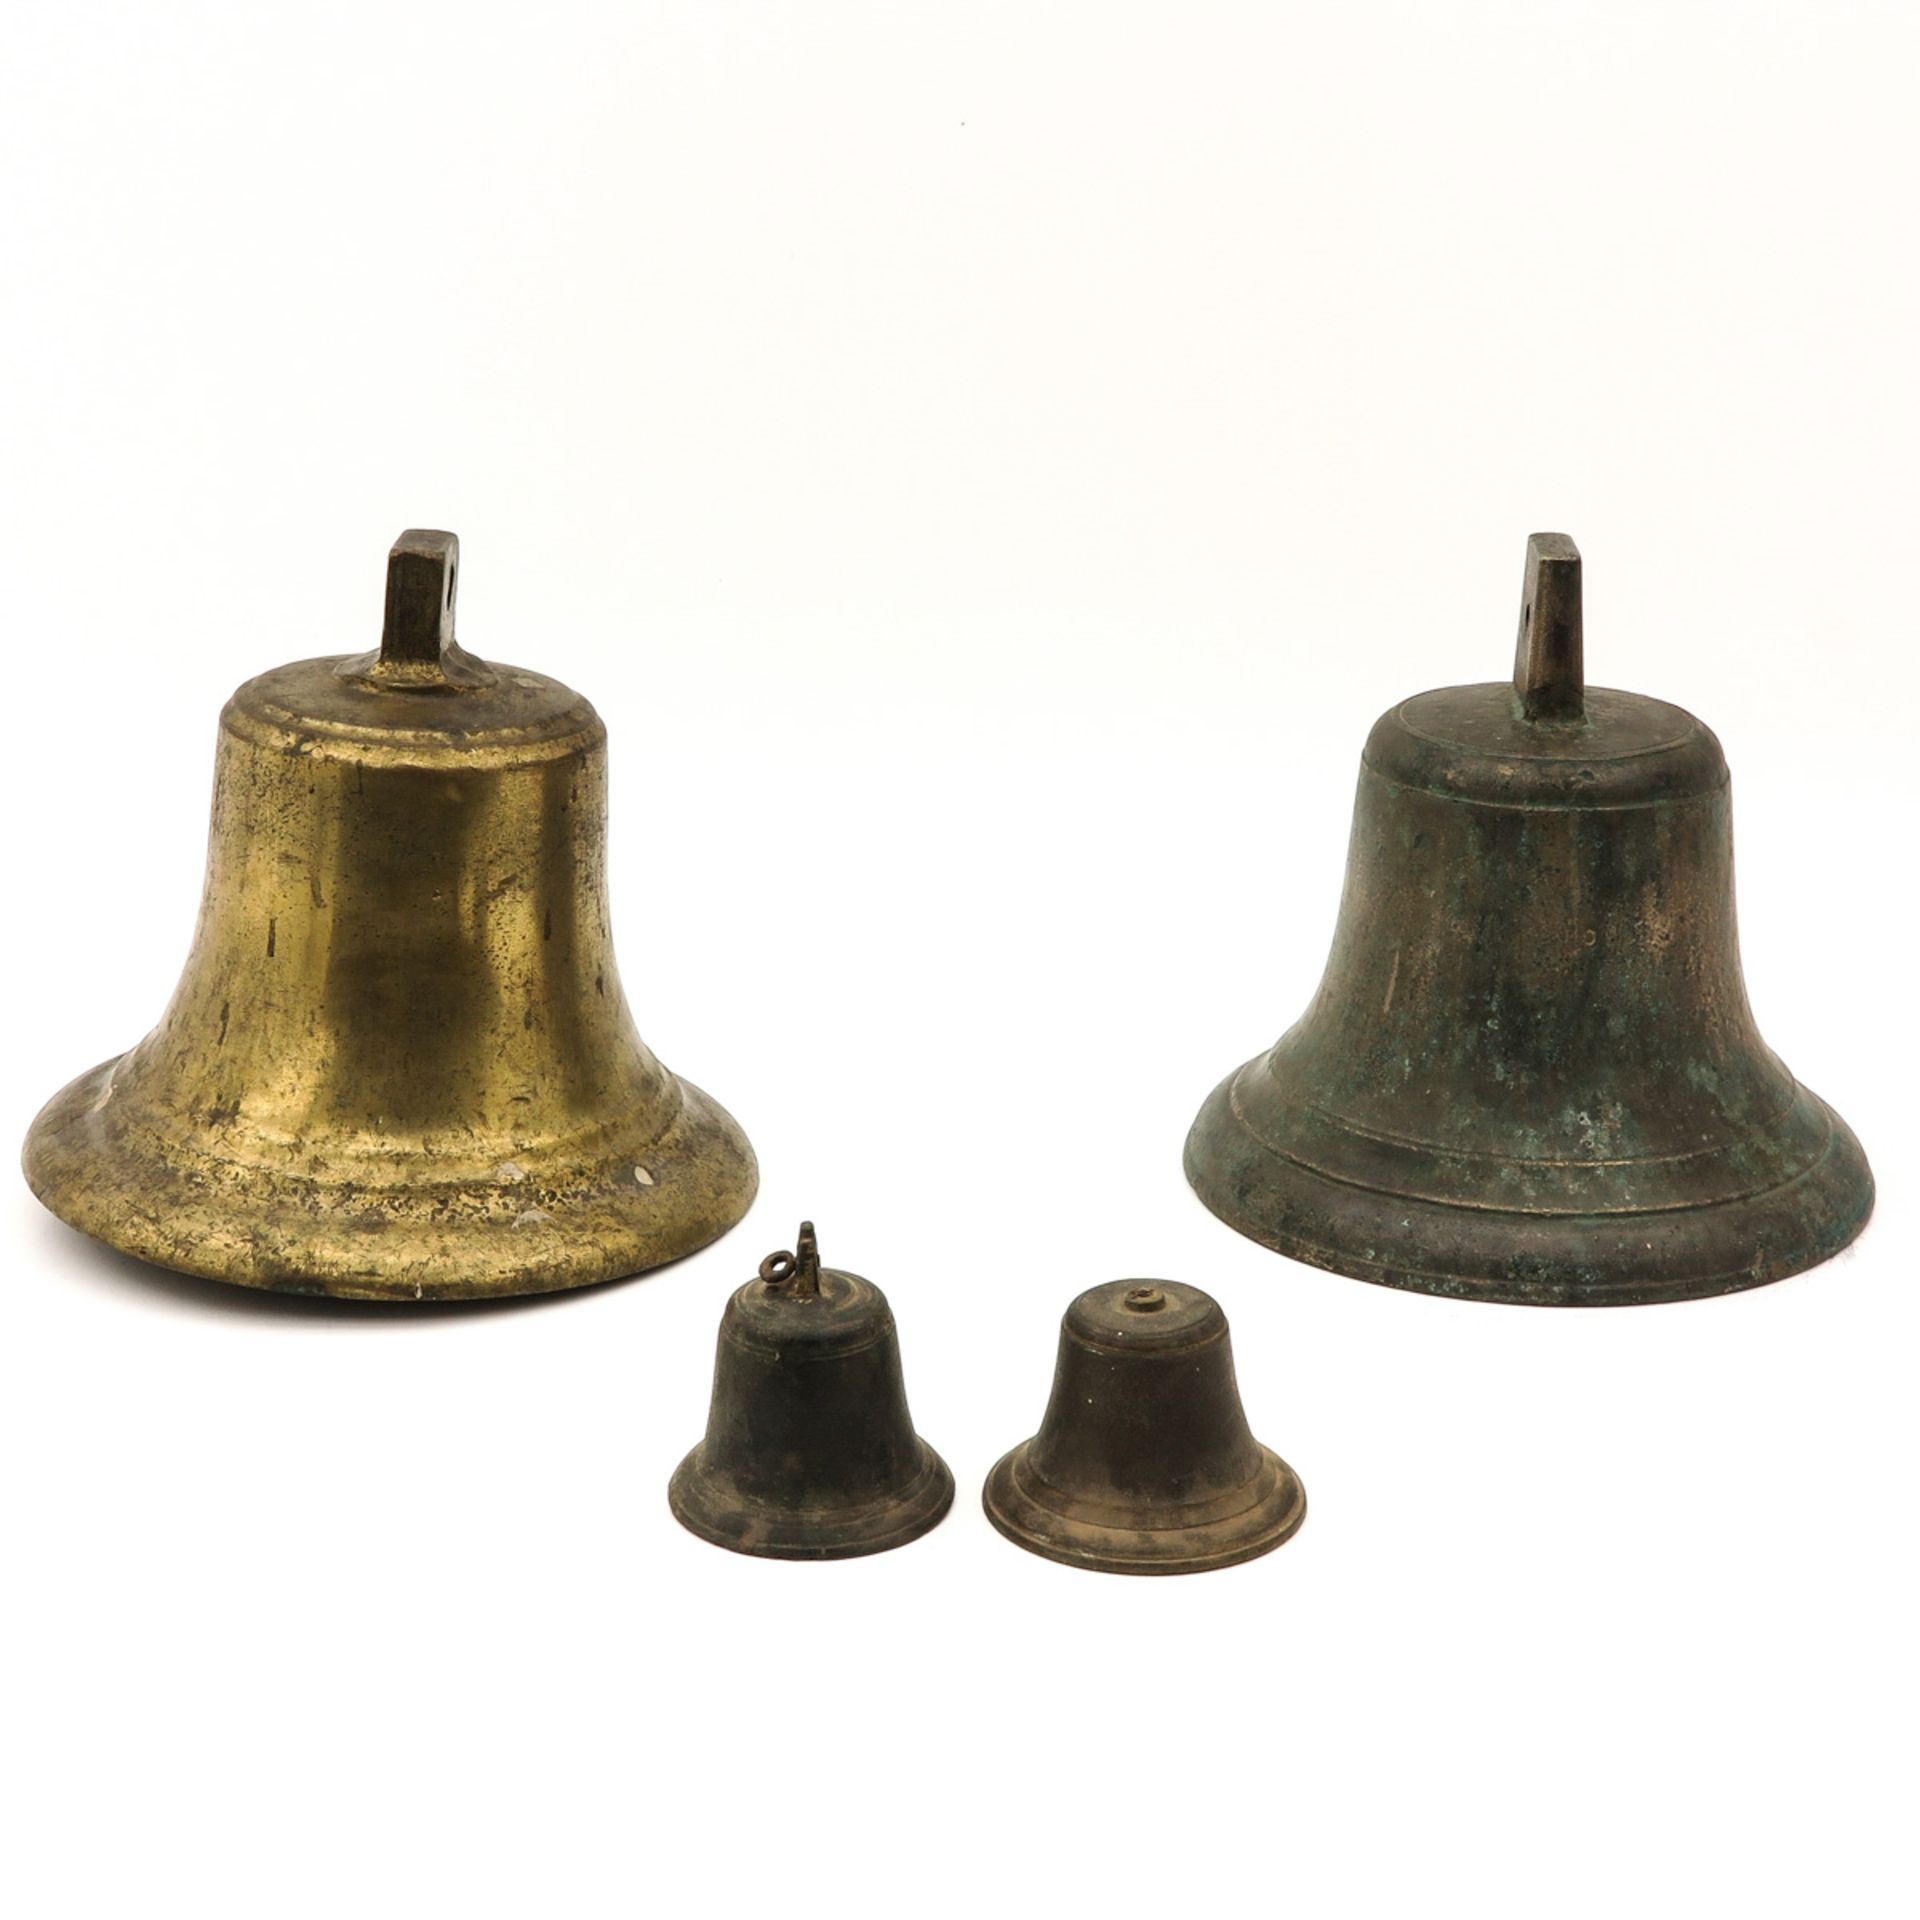 A Lot of 4 Copper Bells - Image 3 of 7